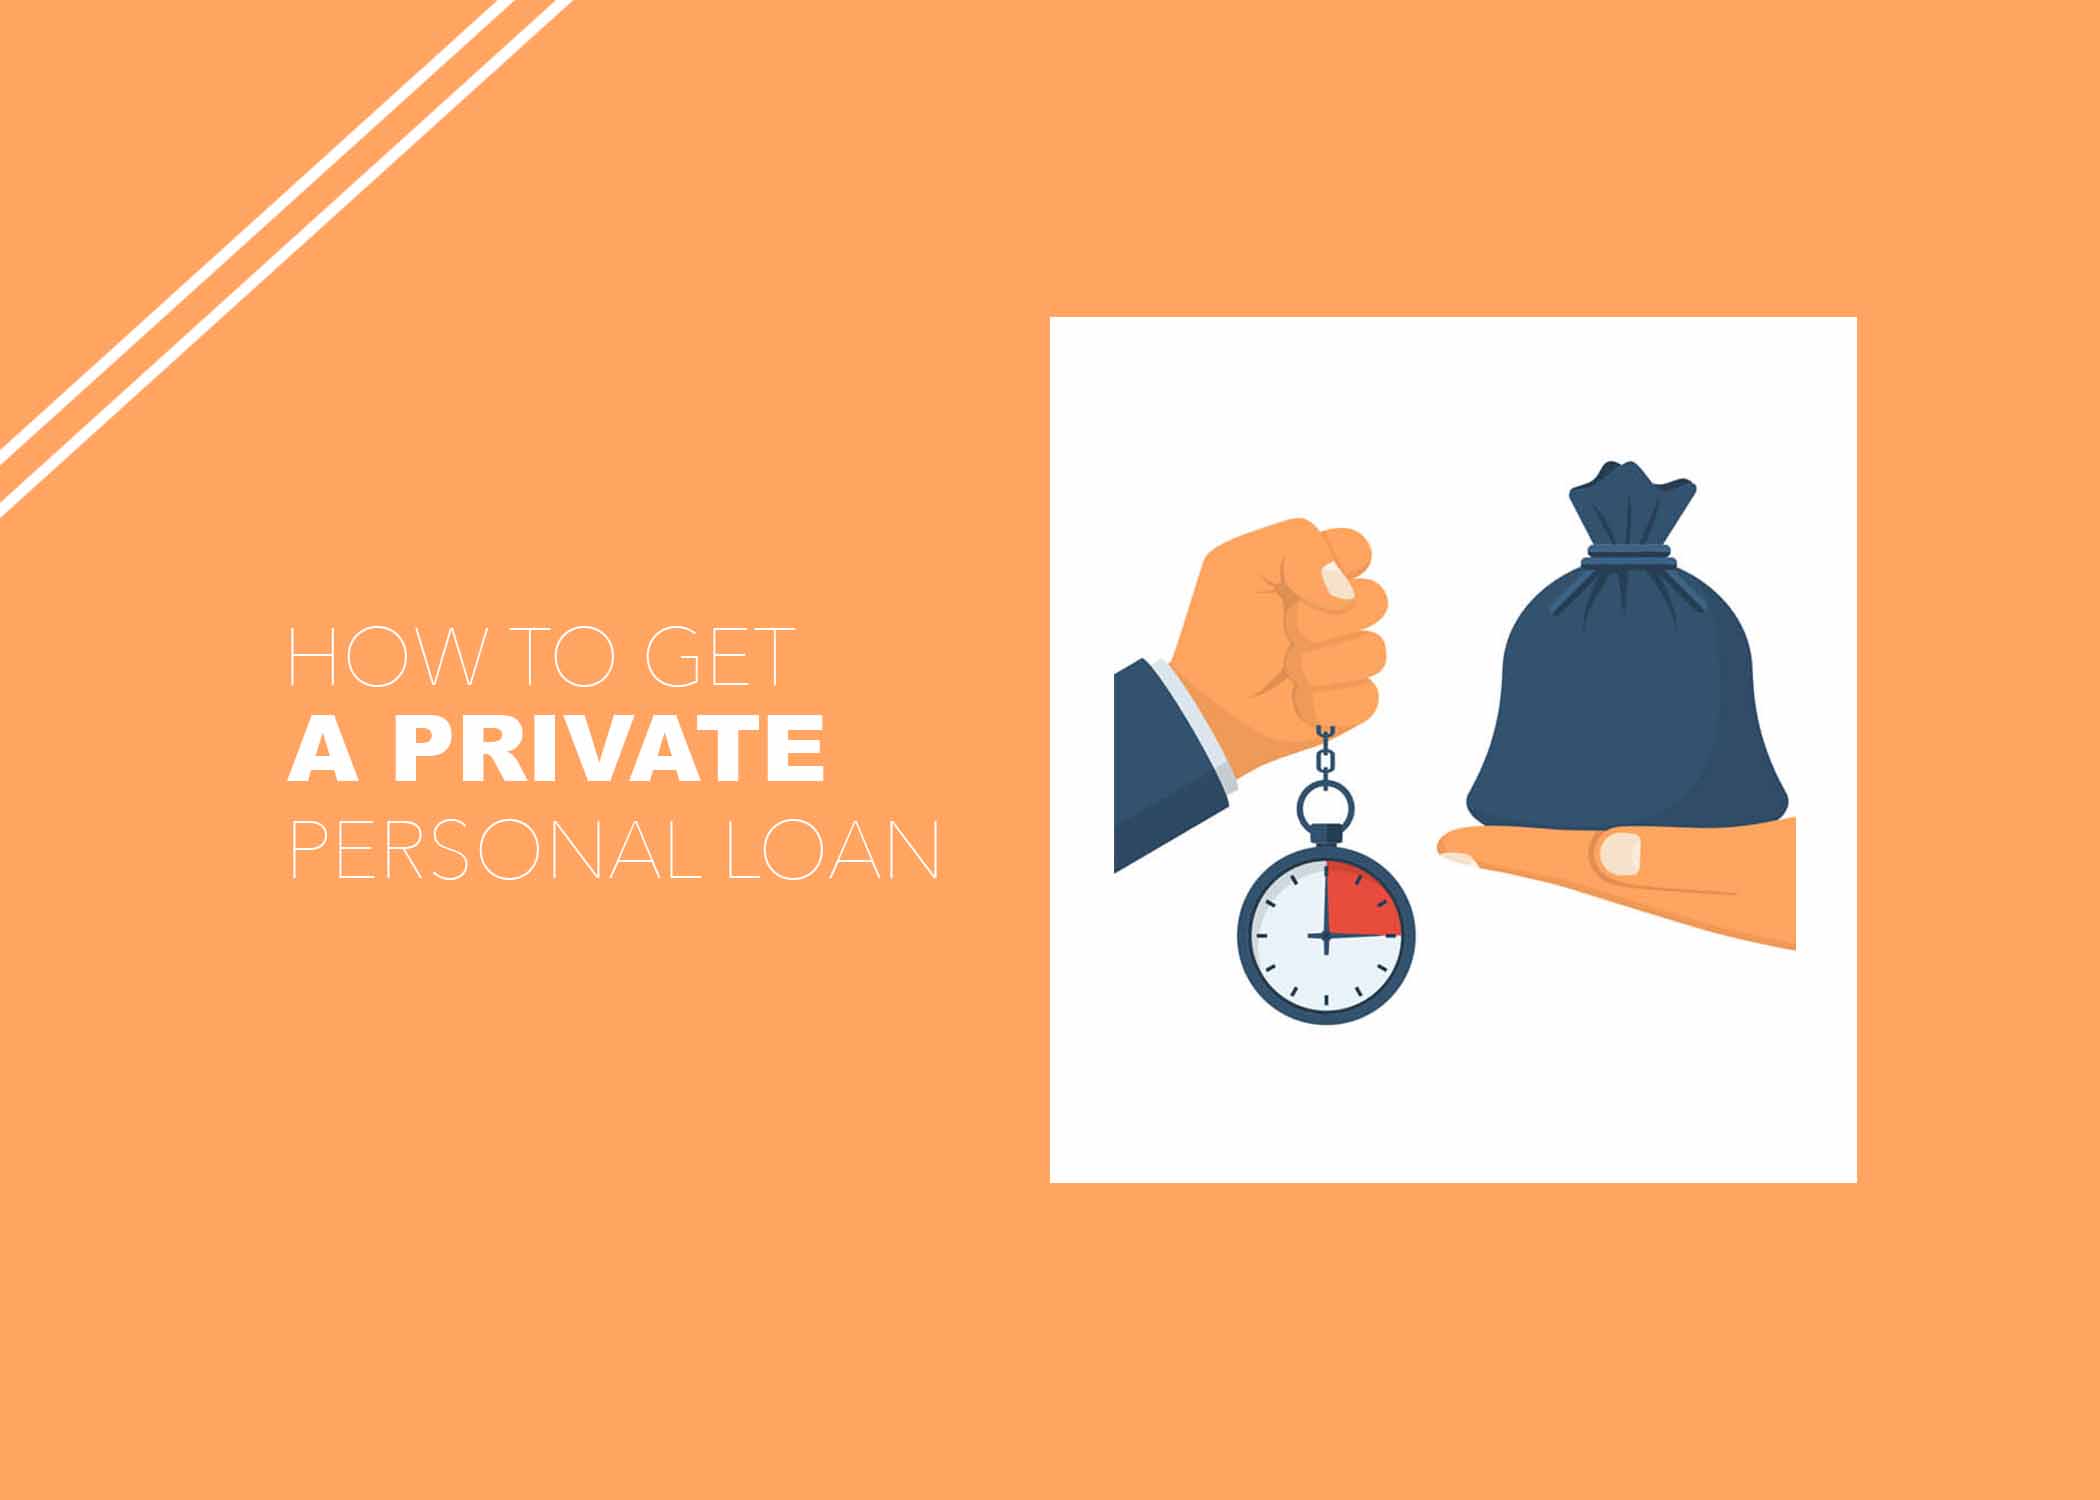 How to Get a Private Personal Loan